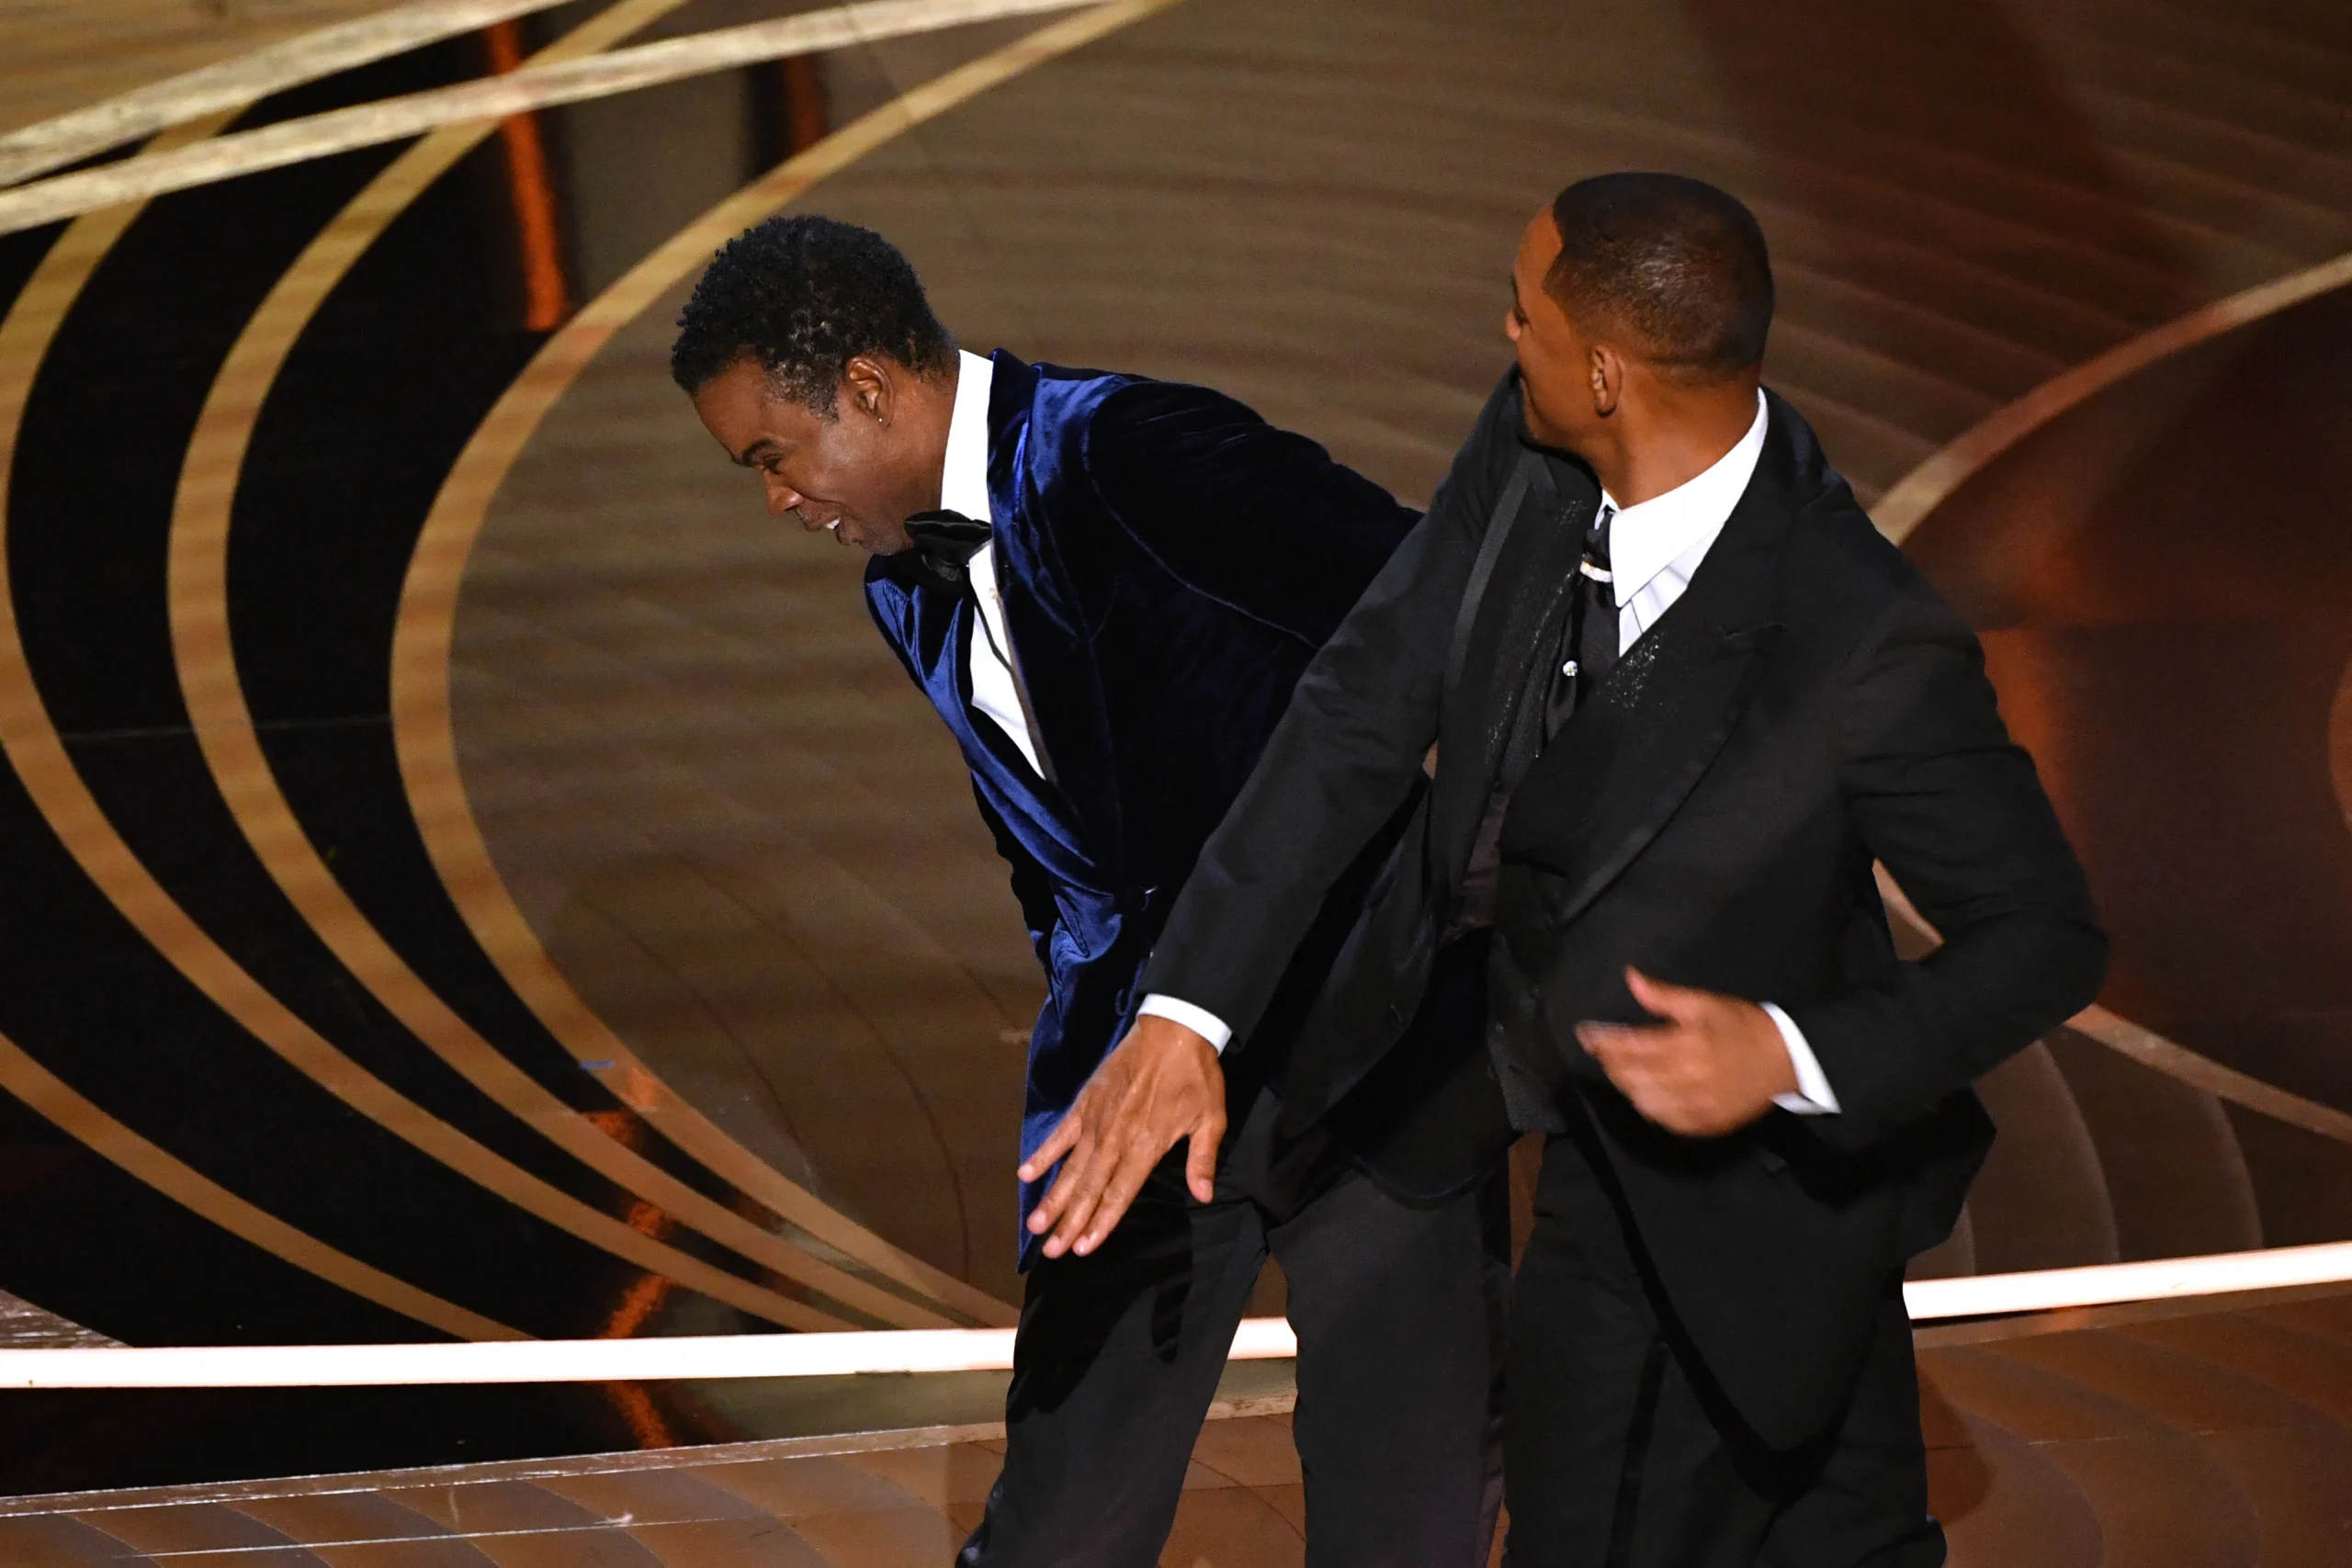 Chris Rock disses Will Smith's apology video